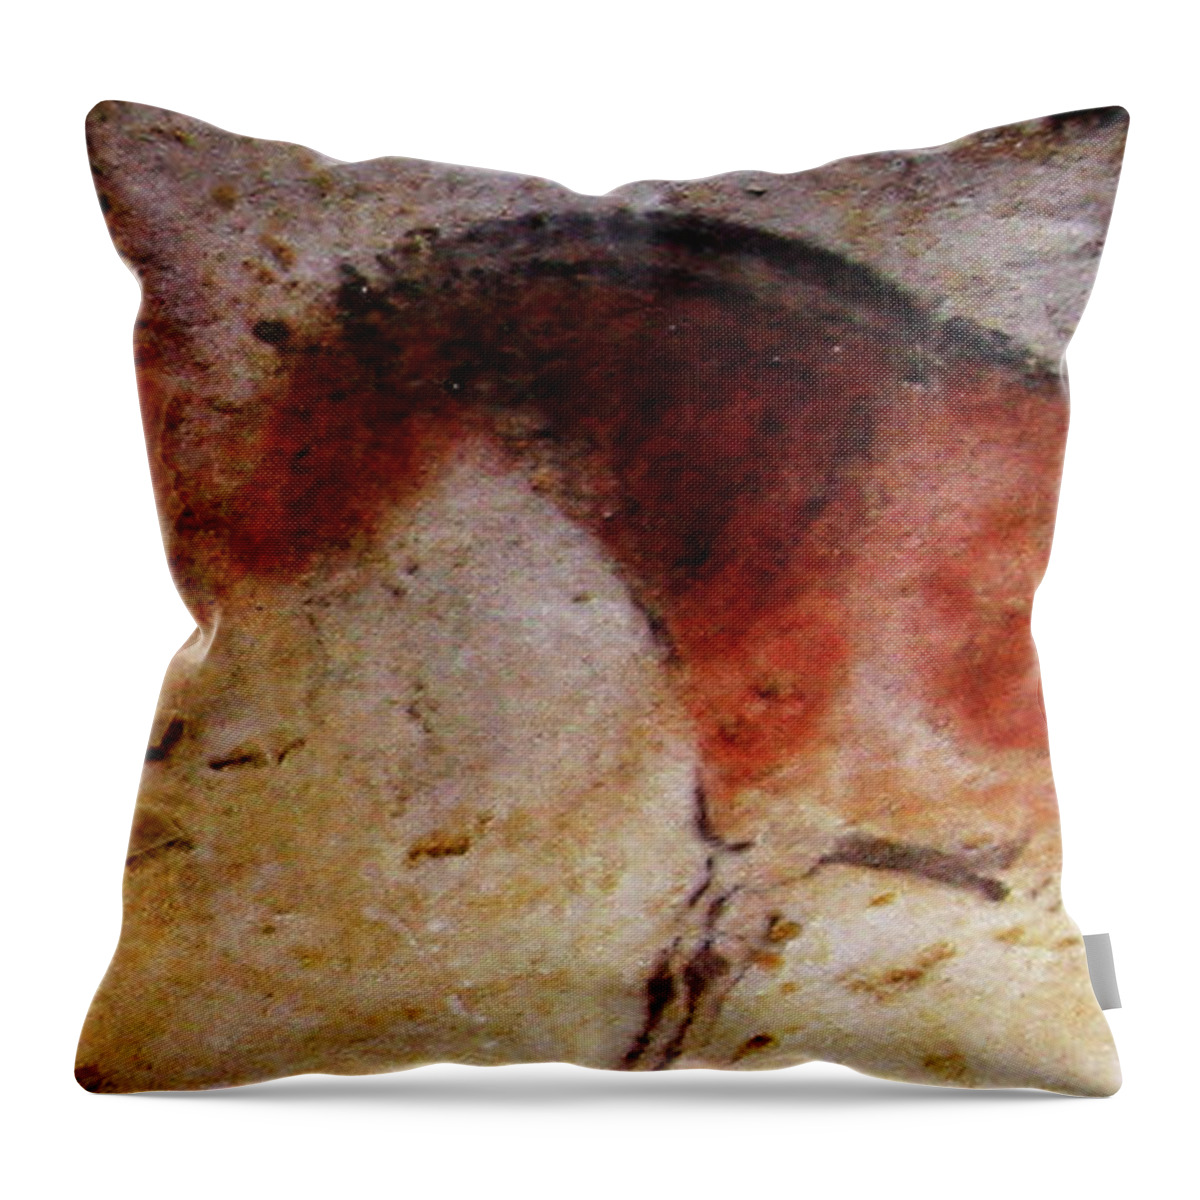 Altamira Cave Throw Pillow featuring the digital art Altamira Horse by Asok Mukhopadhyay